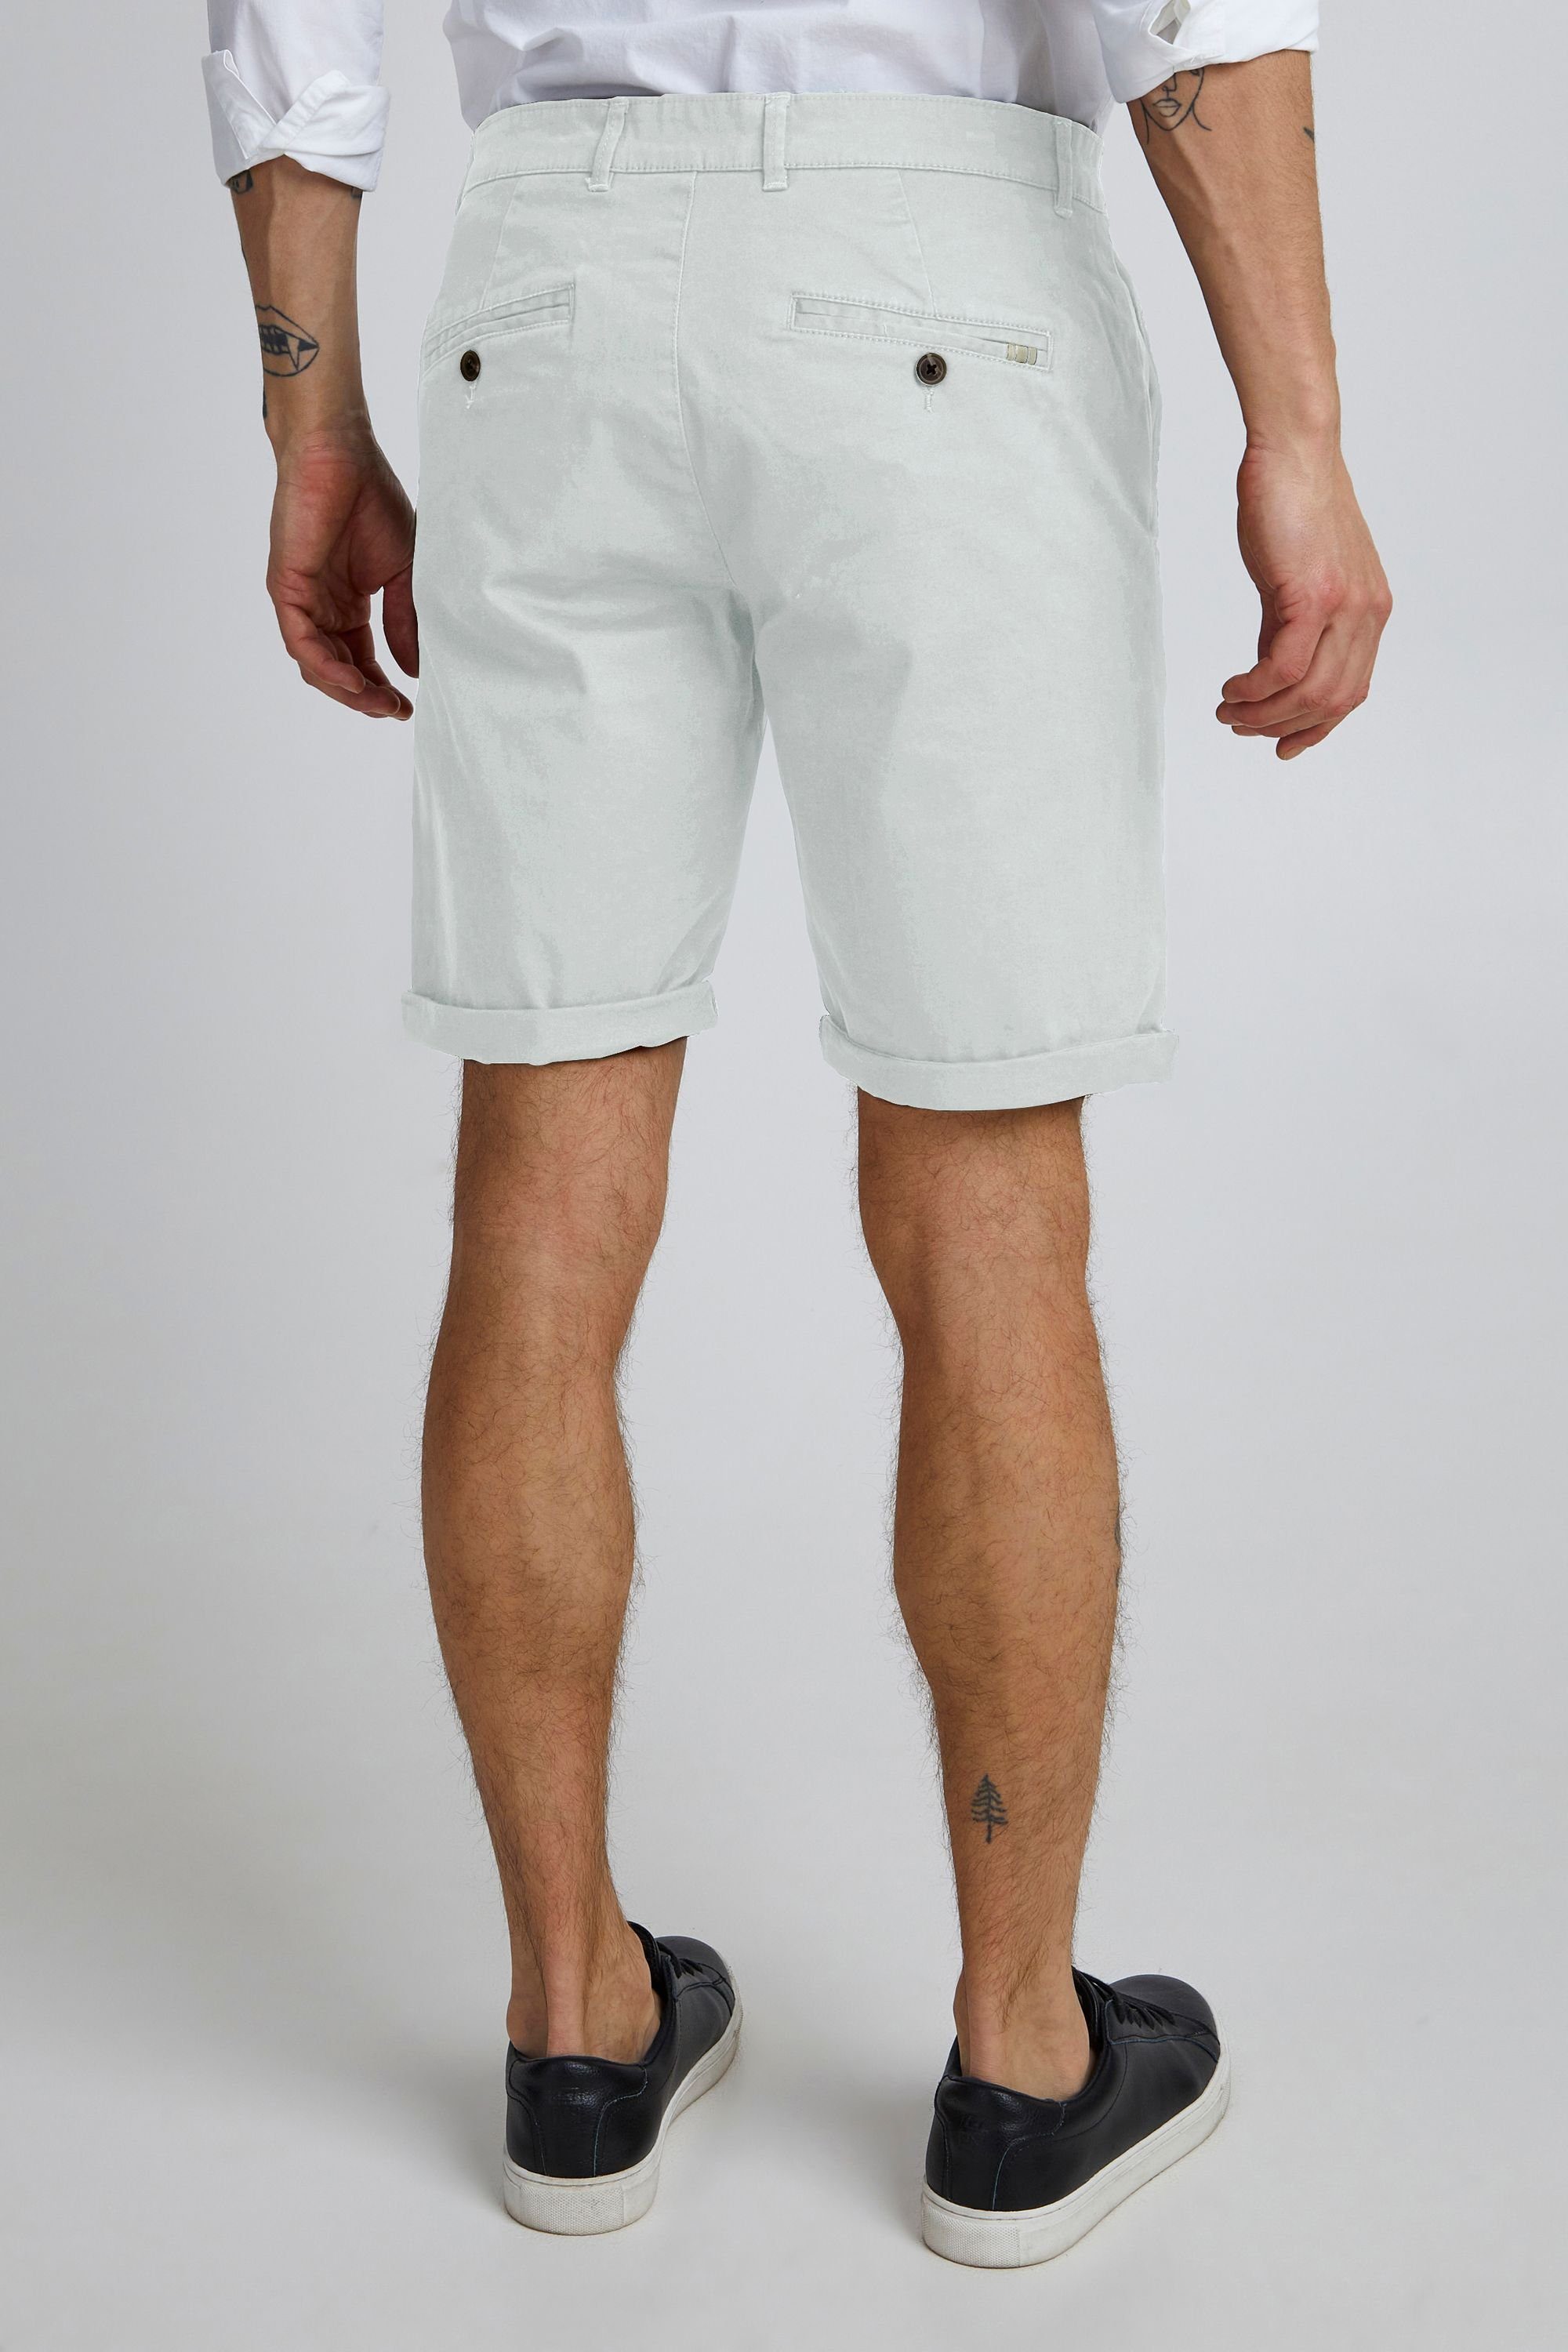 21200395 - Rockcliffe !Solid - Shorts (134404) Ice Shorts Flow 7193106,